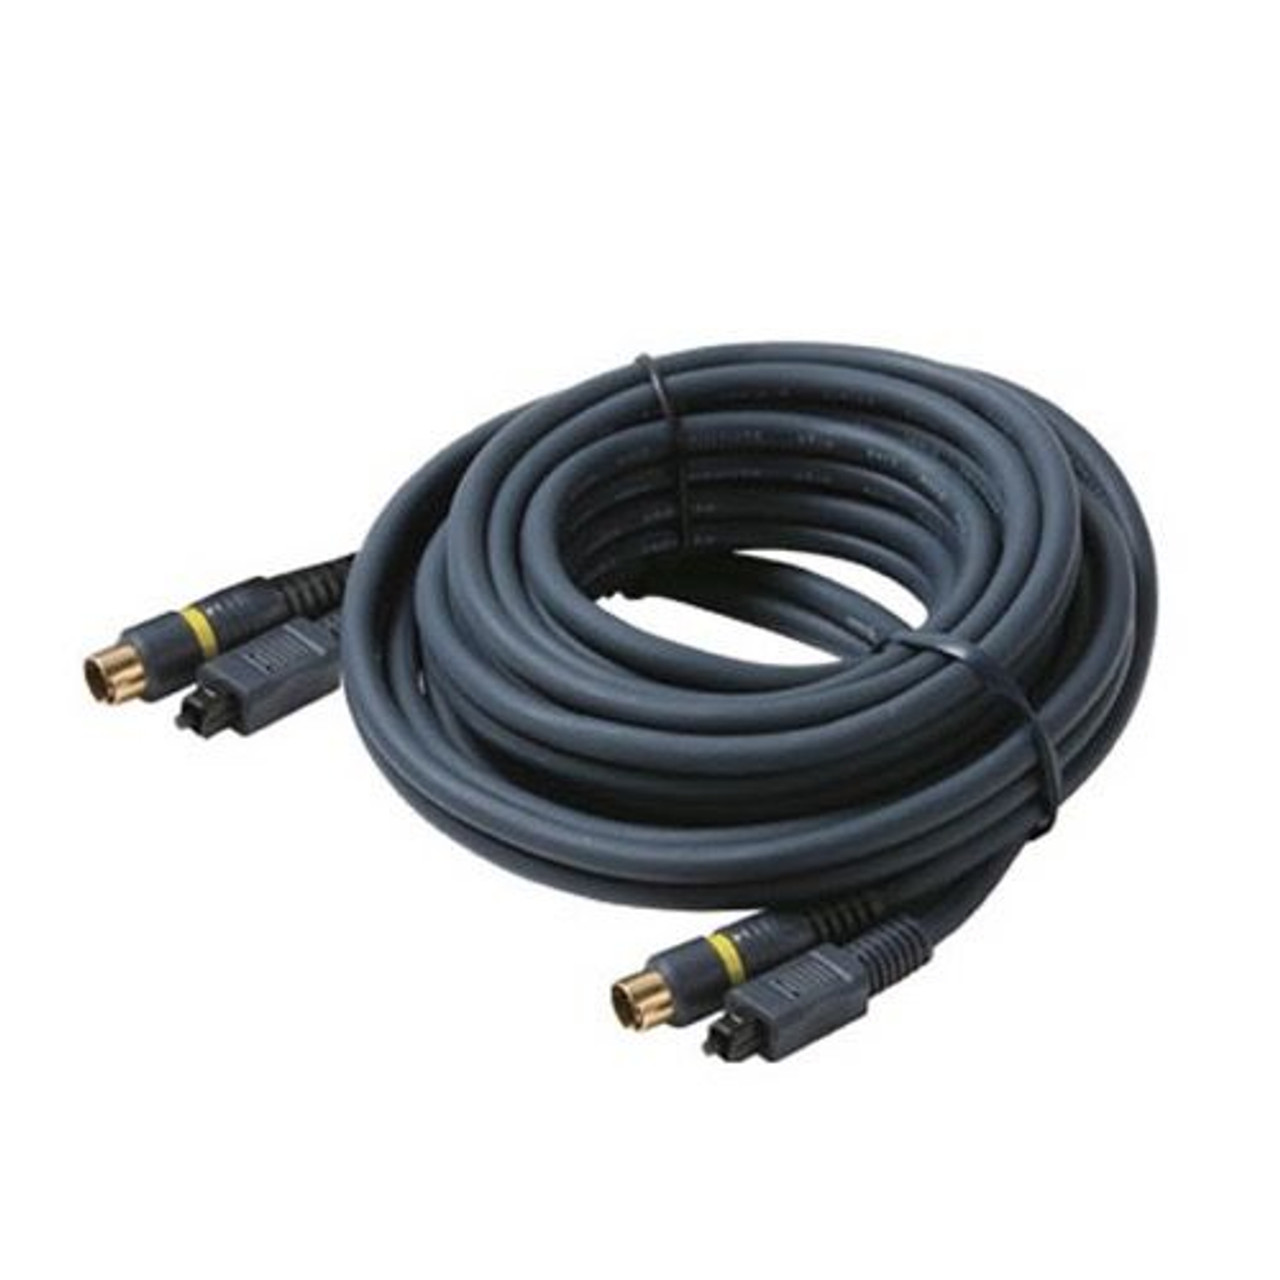 Steren 253-012BL 12' FT S-Video and Toslink Fiber Optical Digital Audio Cable with Gold Plated A/V Ends Toslink Dolby Audio Video TV Connection Component Premium Output Input Hook-Up Jacks, Part # 253012-BL